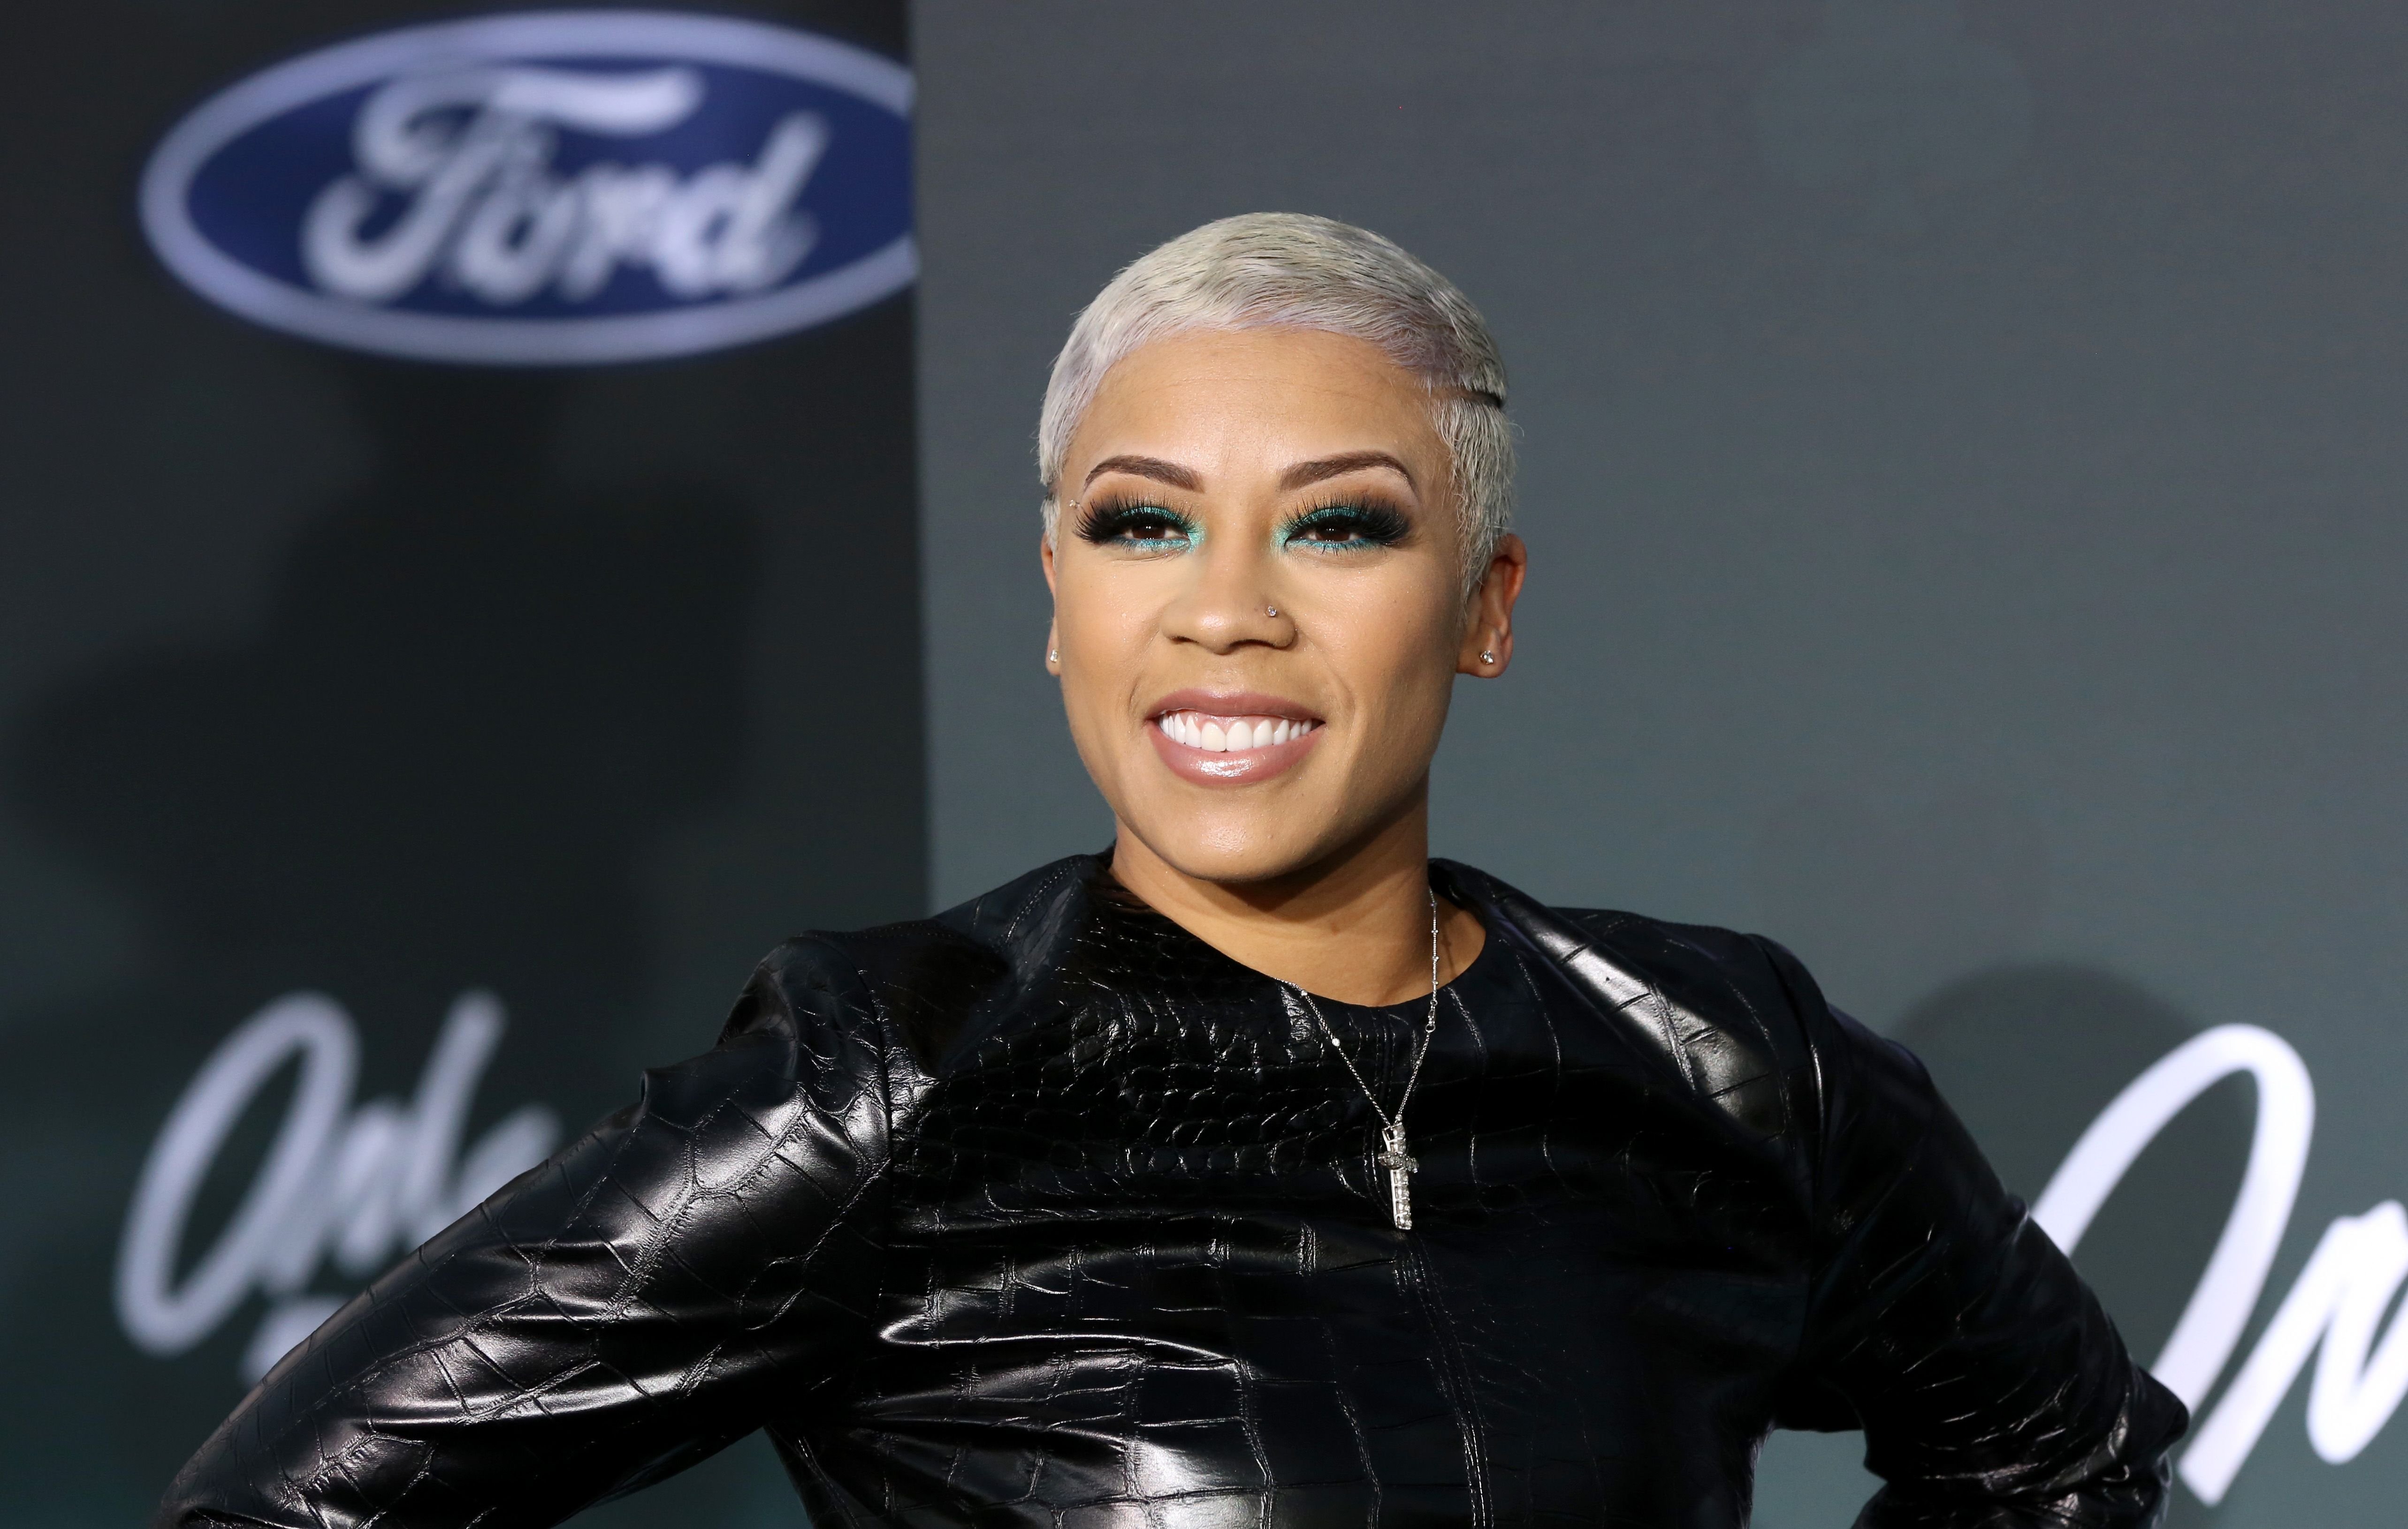 Keyshia Cole at the 2019 Soul Train Awards at the Orleans Arena on November 17, 2019 in Las Vegas, Nevada | Photo: Getty Images  